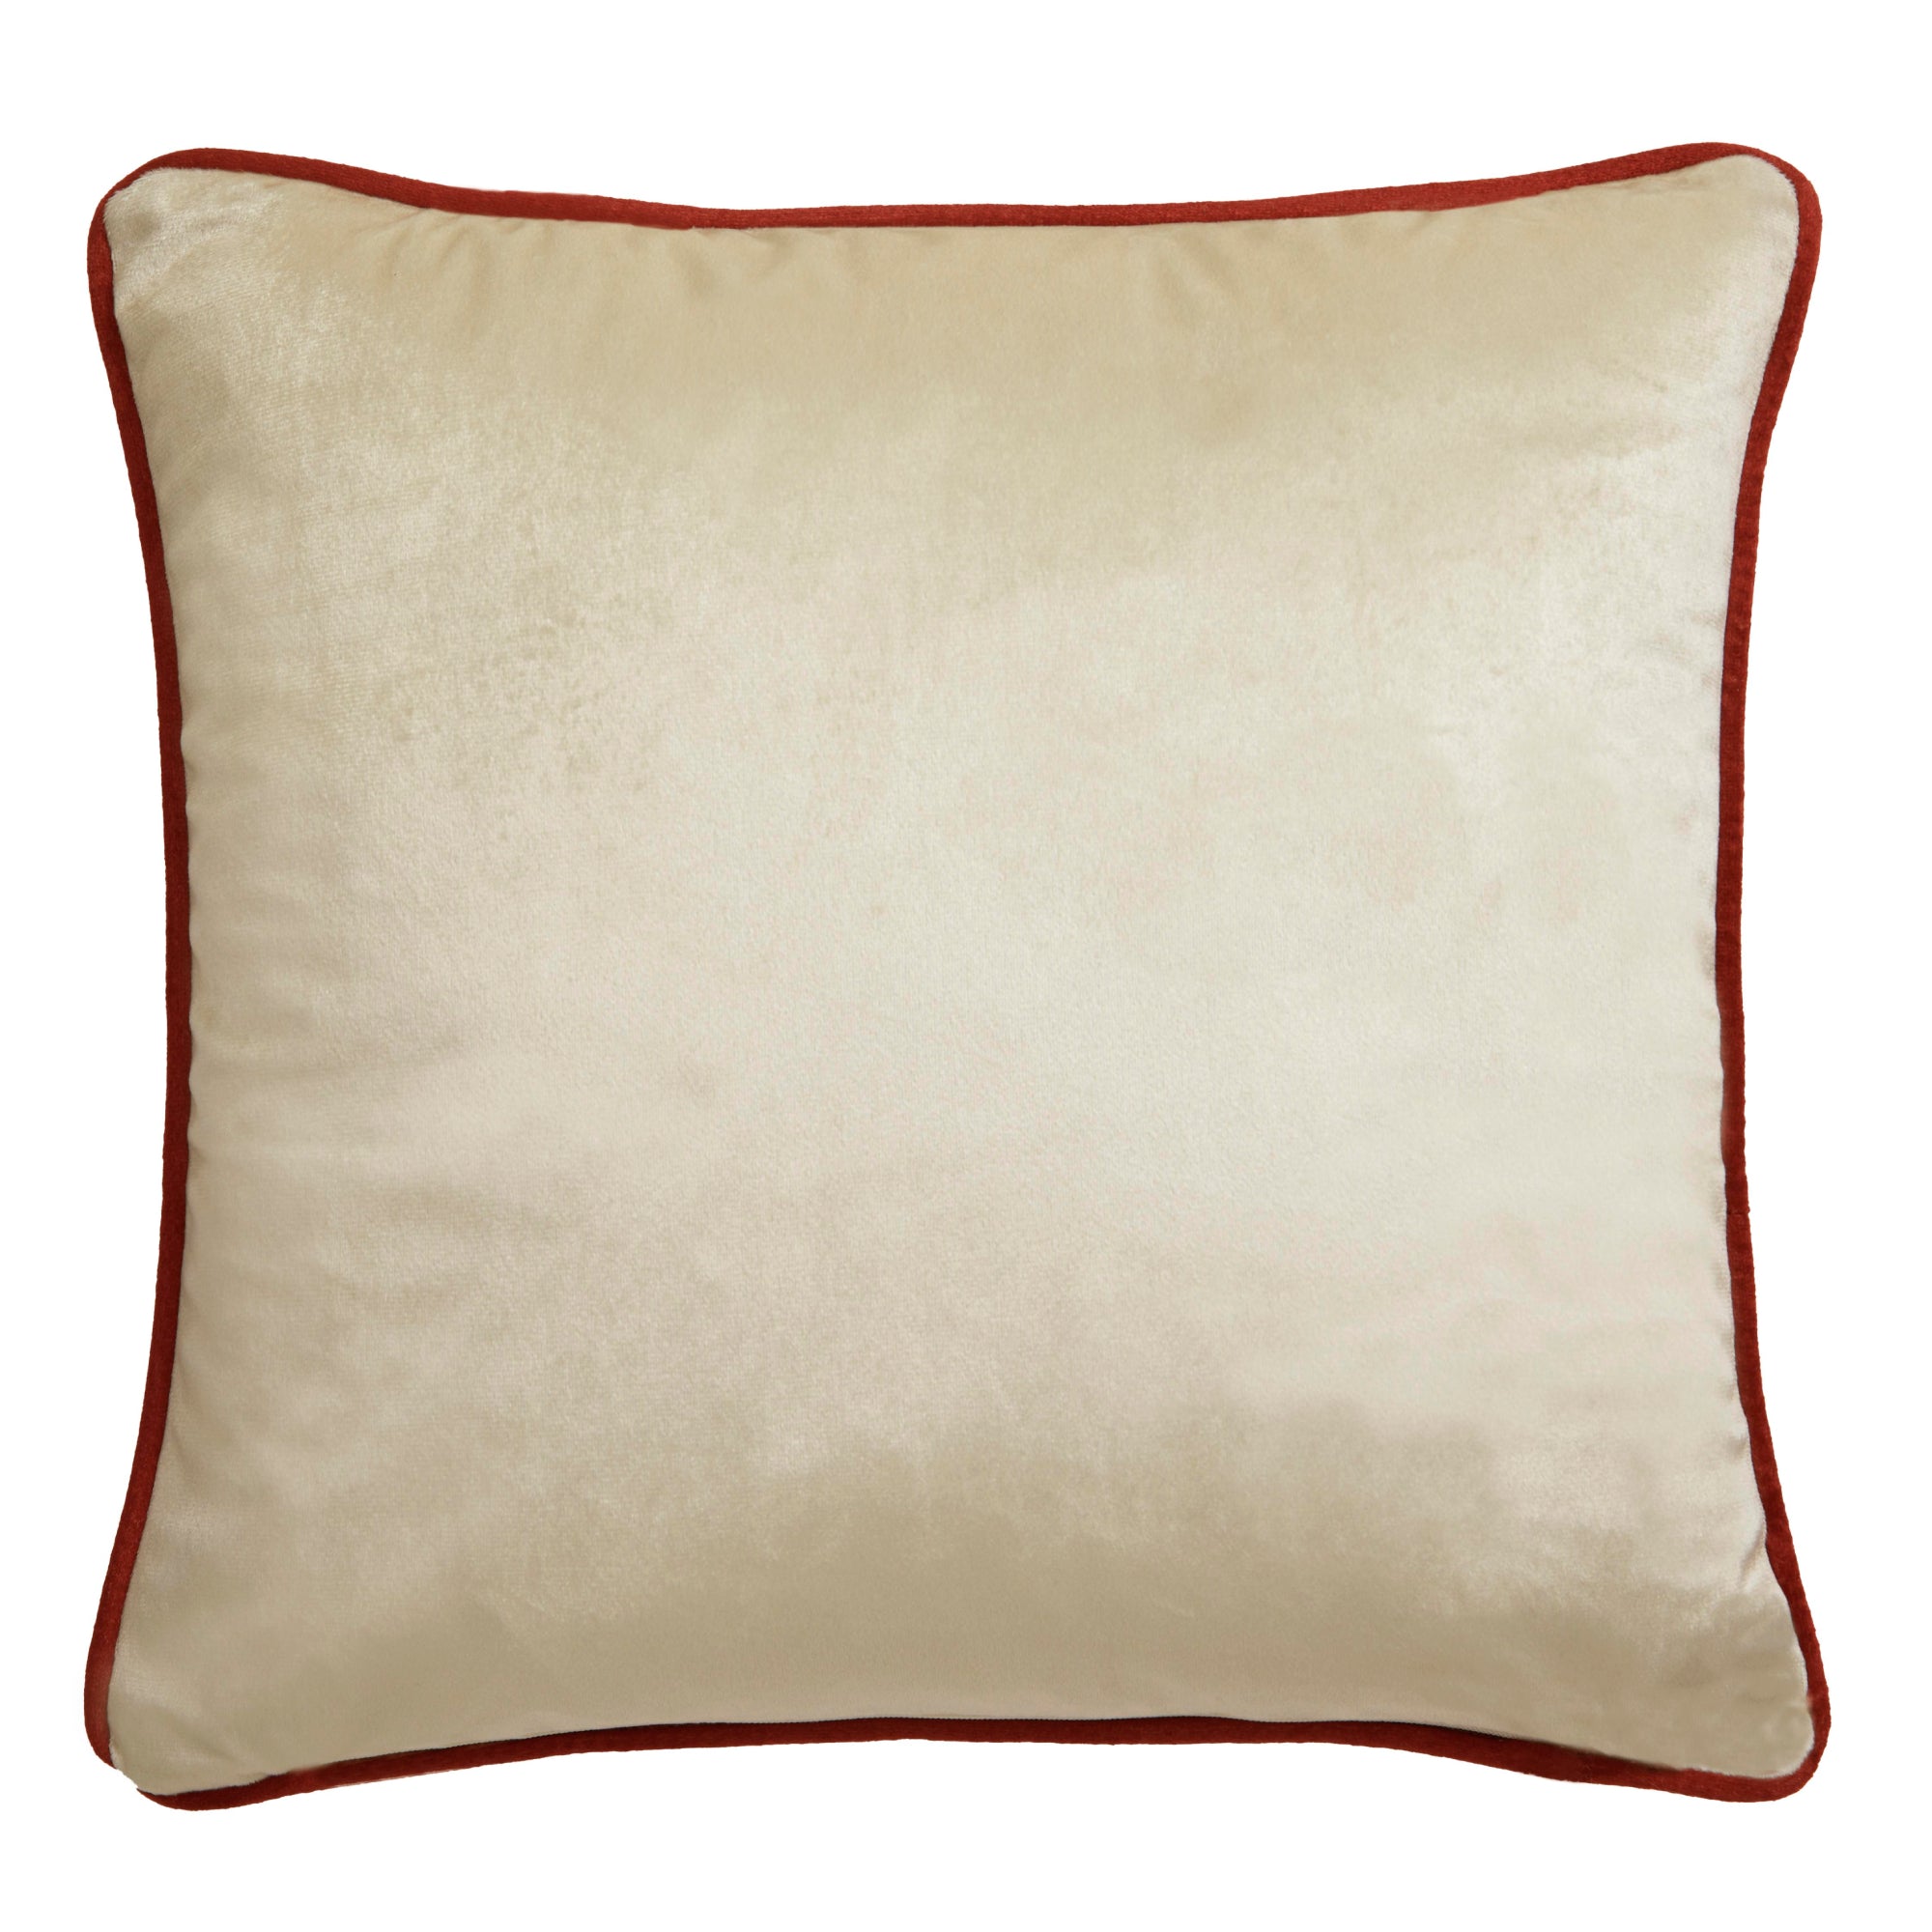 Filled Cushion Pants on Fire by Laurence Llewelyn-Bowen in Terracotta